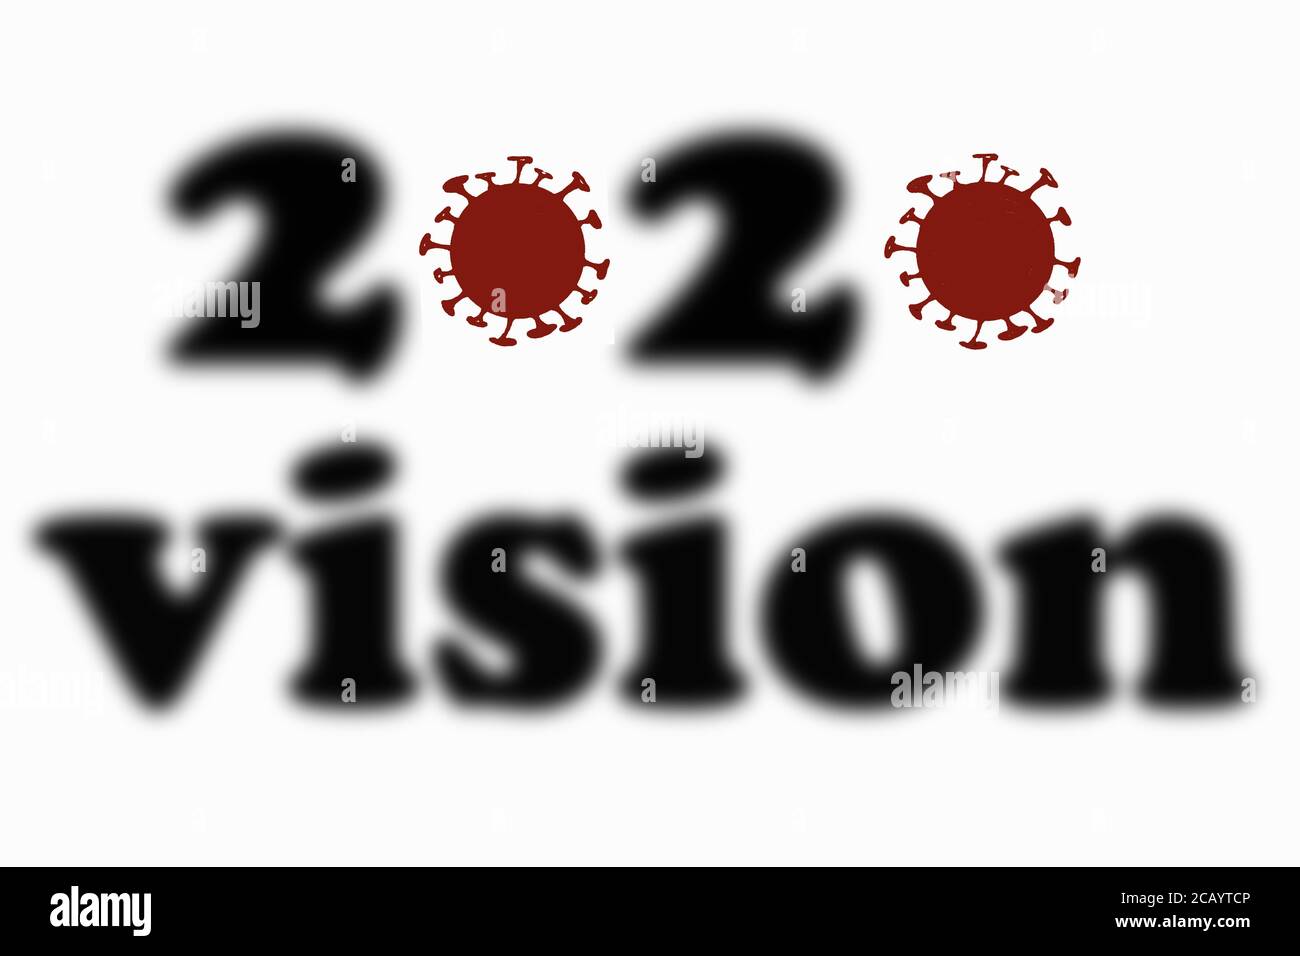 Text graphic reads '2020 vision' with all text blurred, concept for unclear information, unknown future related to COVID-19, coronavirus, year 2020 Stock Photo